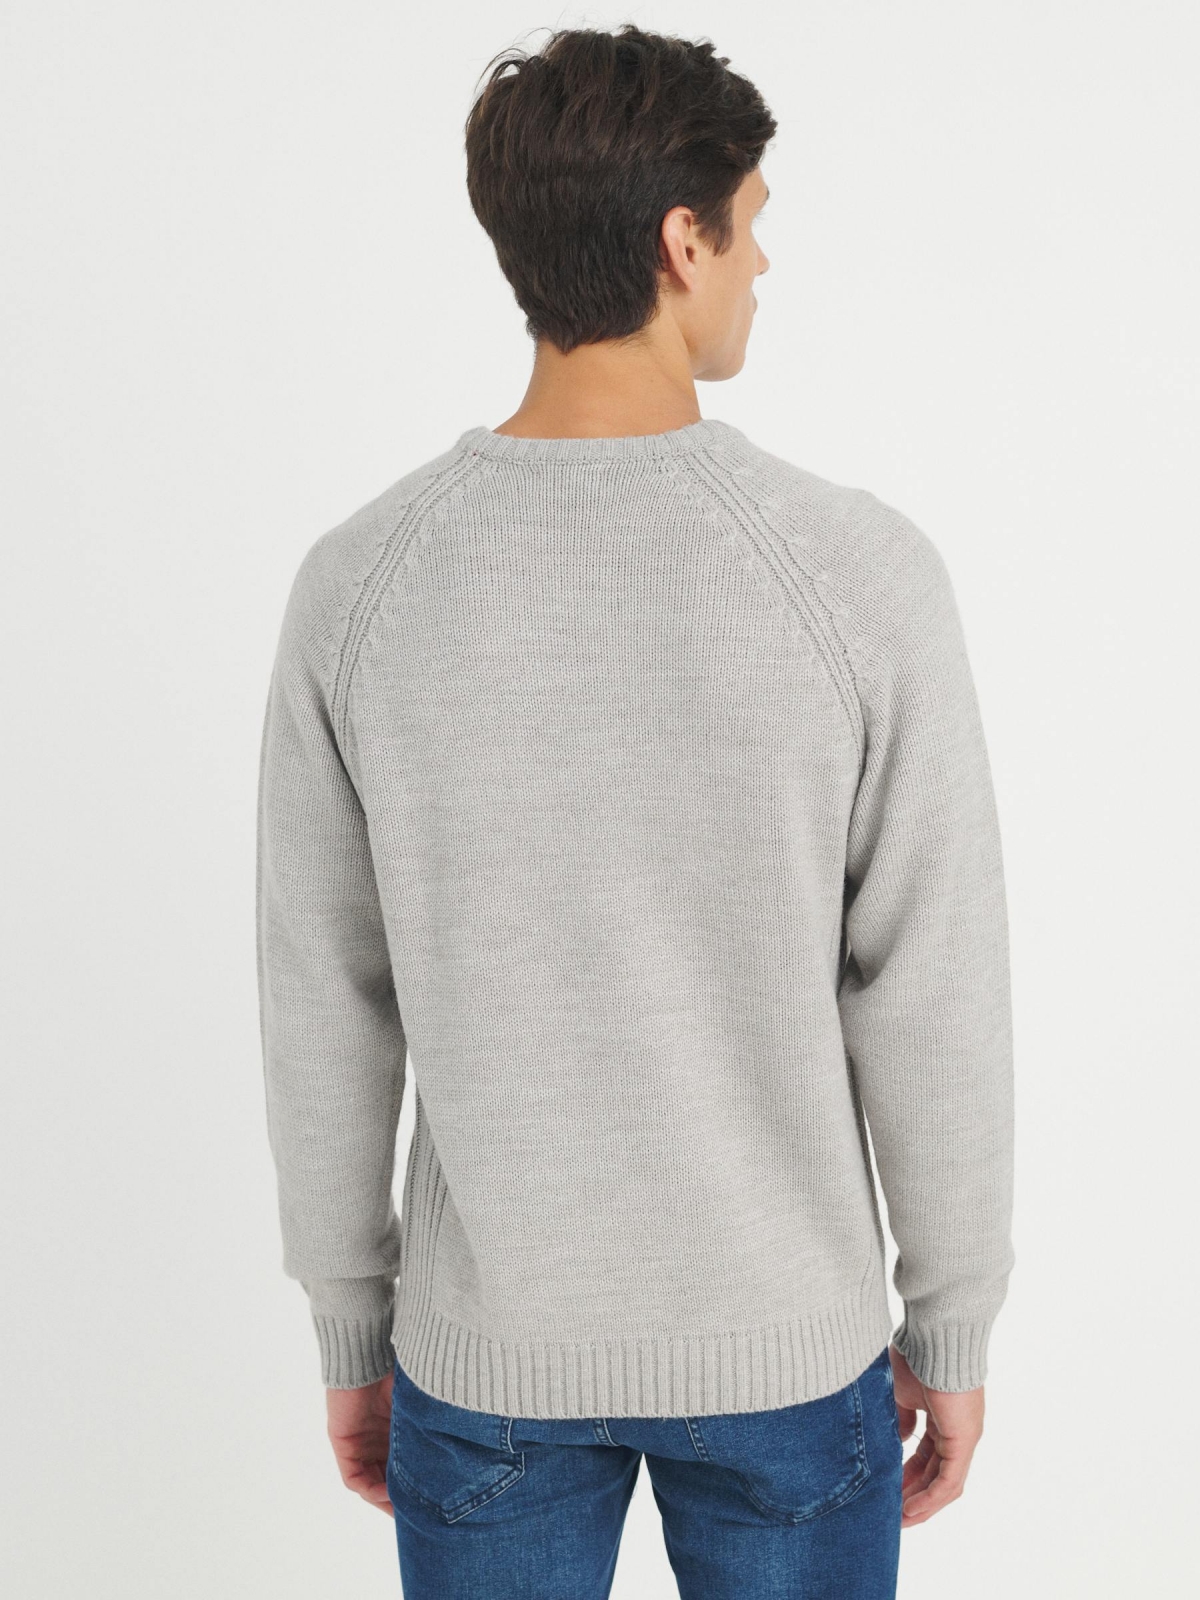 Basic knitted sweater light grey middle back view